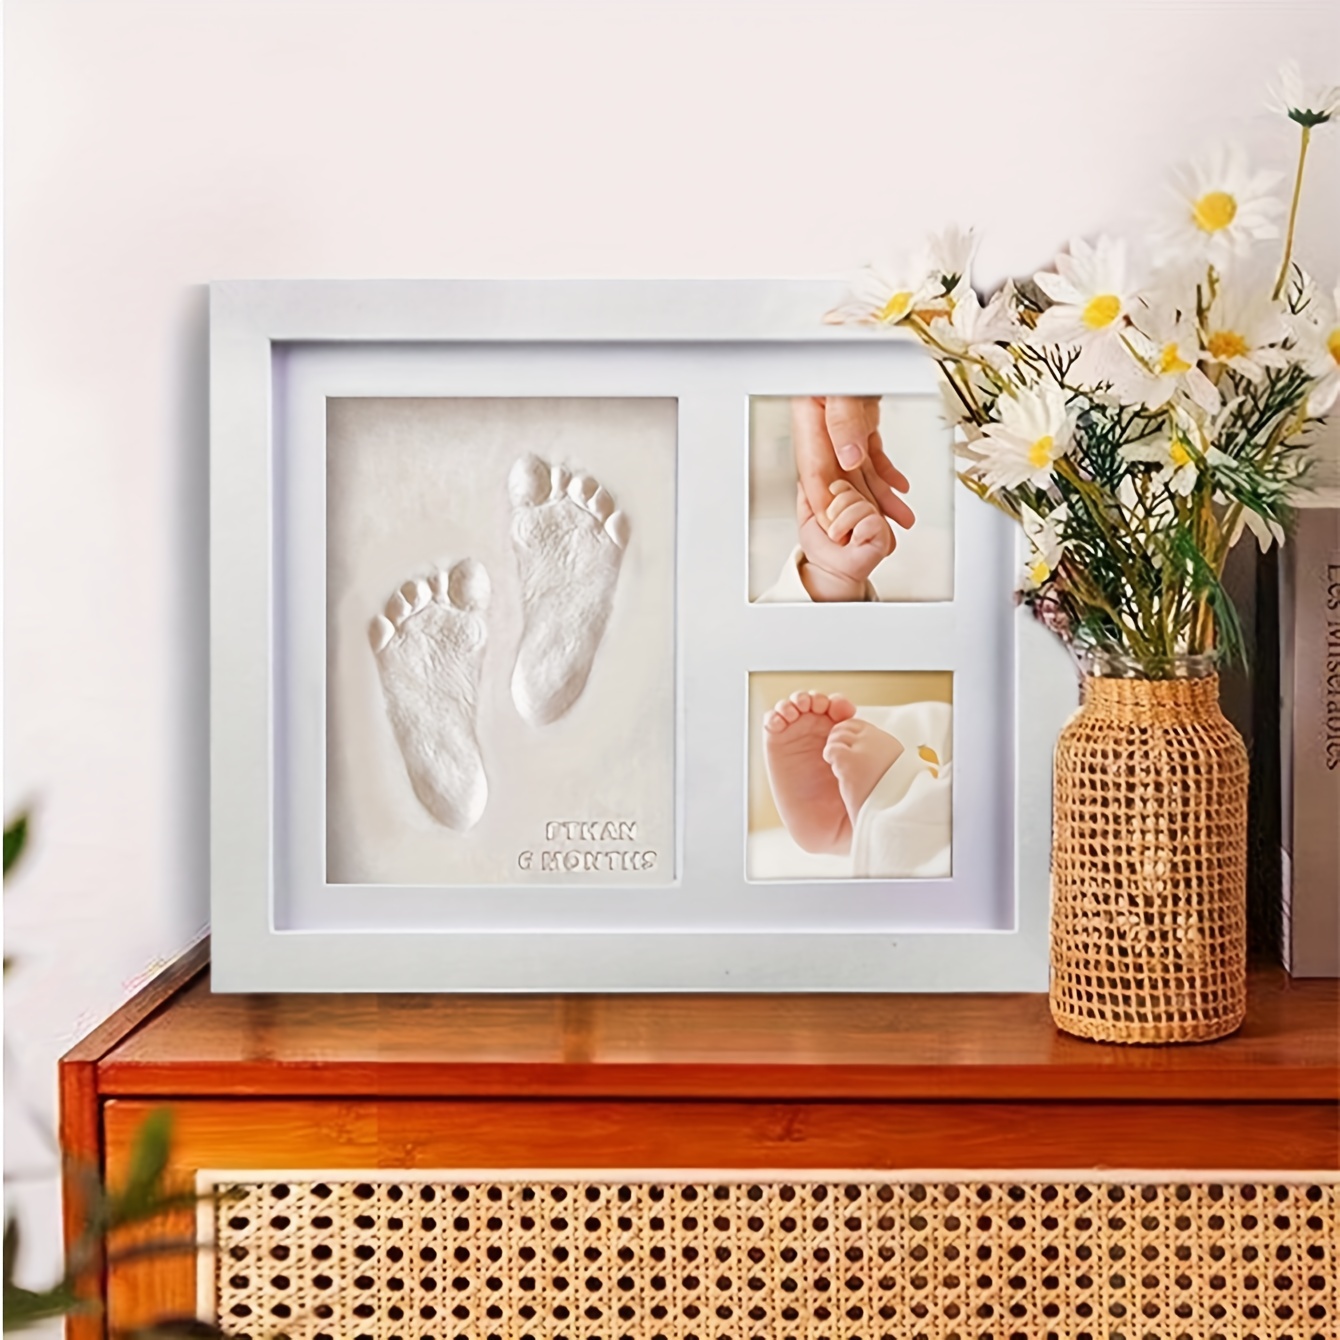 

Personalized Baby Hand & Footprint Kit - Wooden Keepsake Frame For Newborns, Unique Gift For Boys & Girls, Perfect For Kindergarten Decor